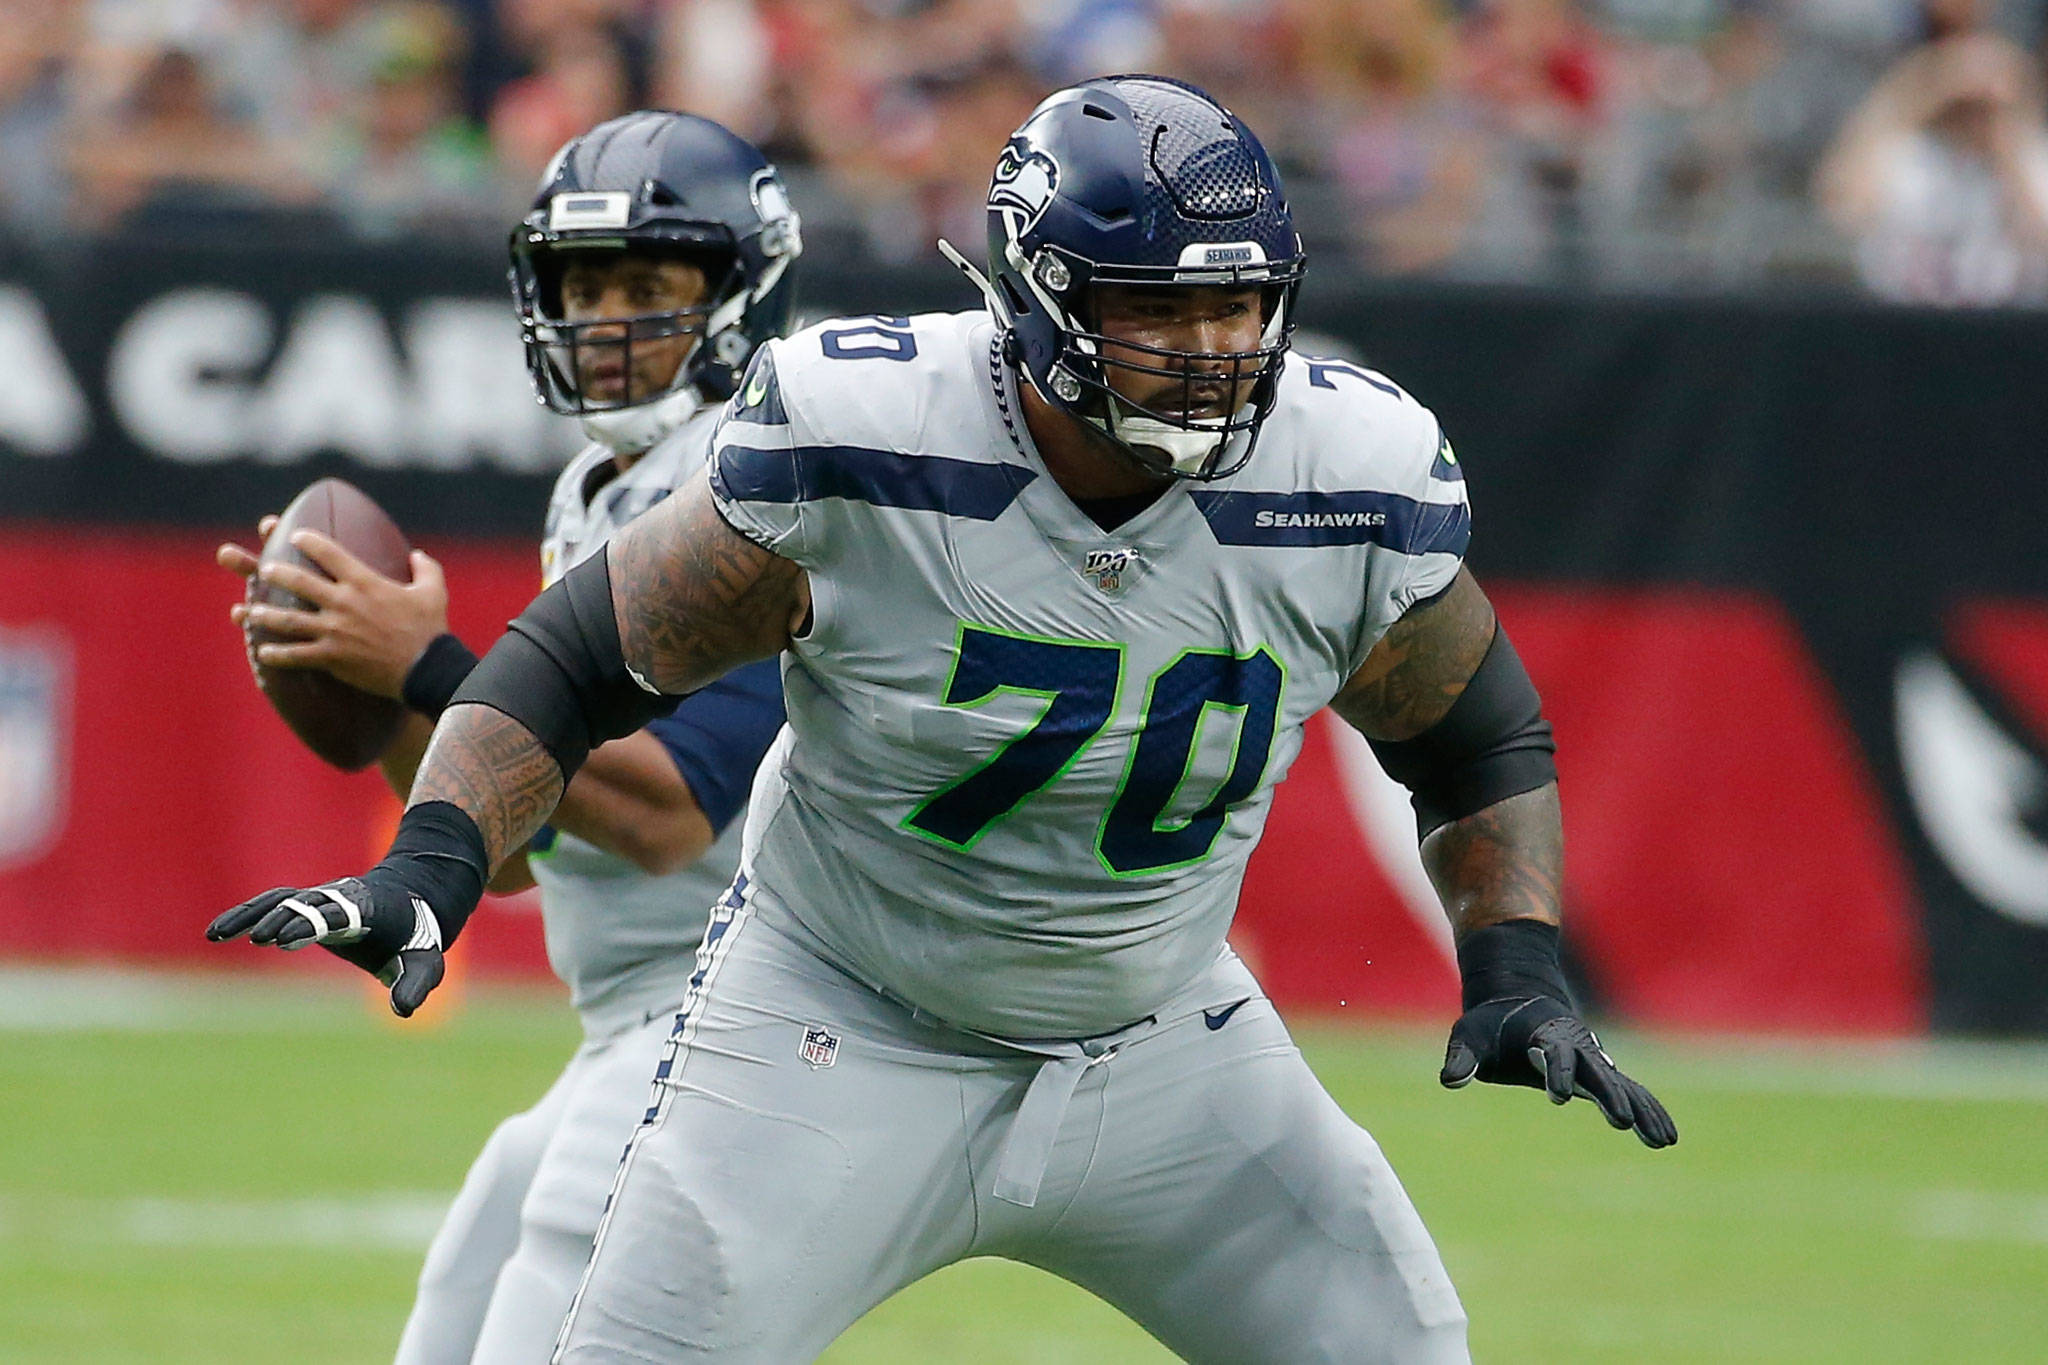 Seahawks offensive guard Mike Iupati (70) block for quarterback Russell Wilson (background) during a game against the Cardinals on Sept. 29, 2019, in Glendale, Ariz. (AP Photo/Rick Scuteri)